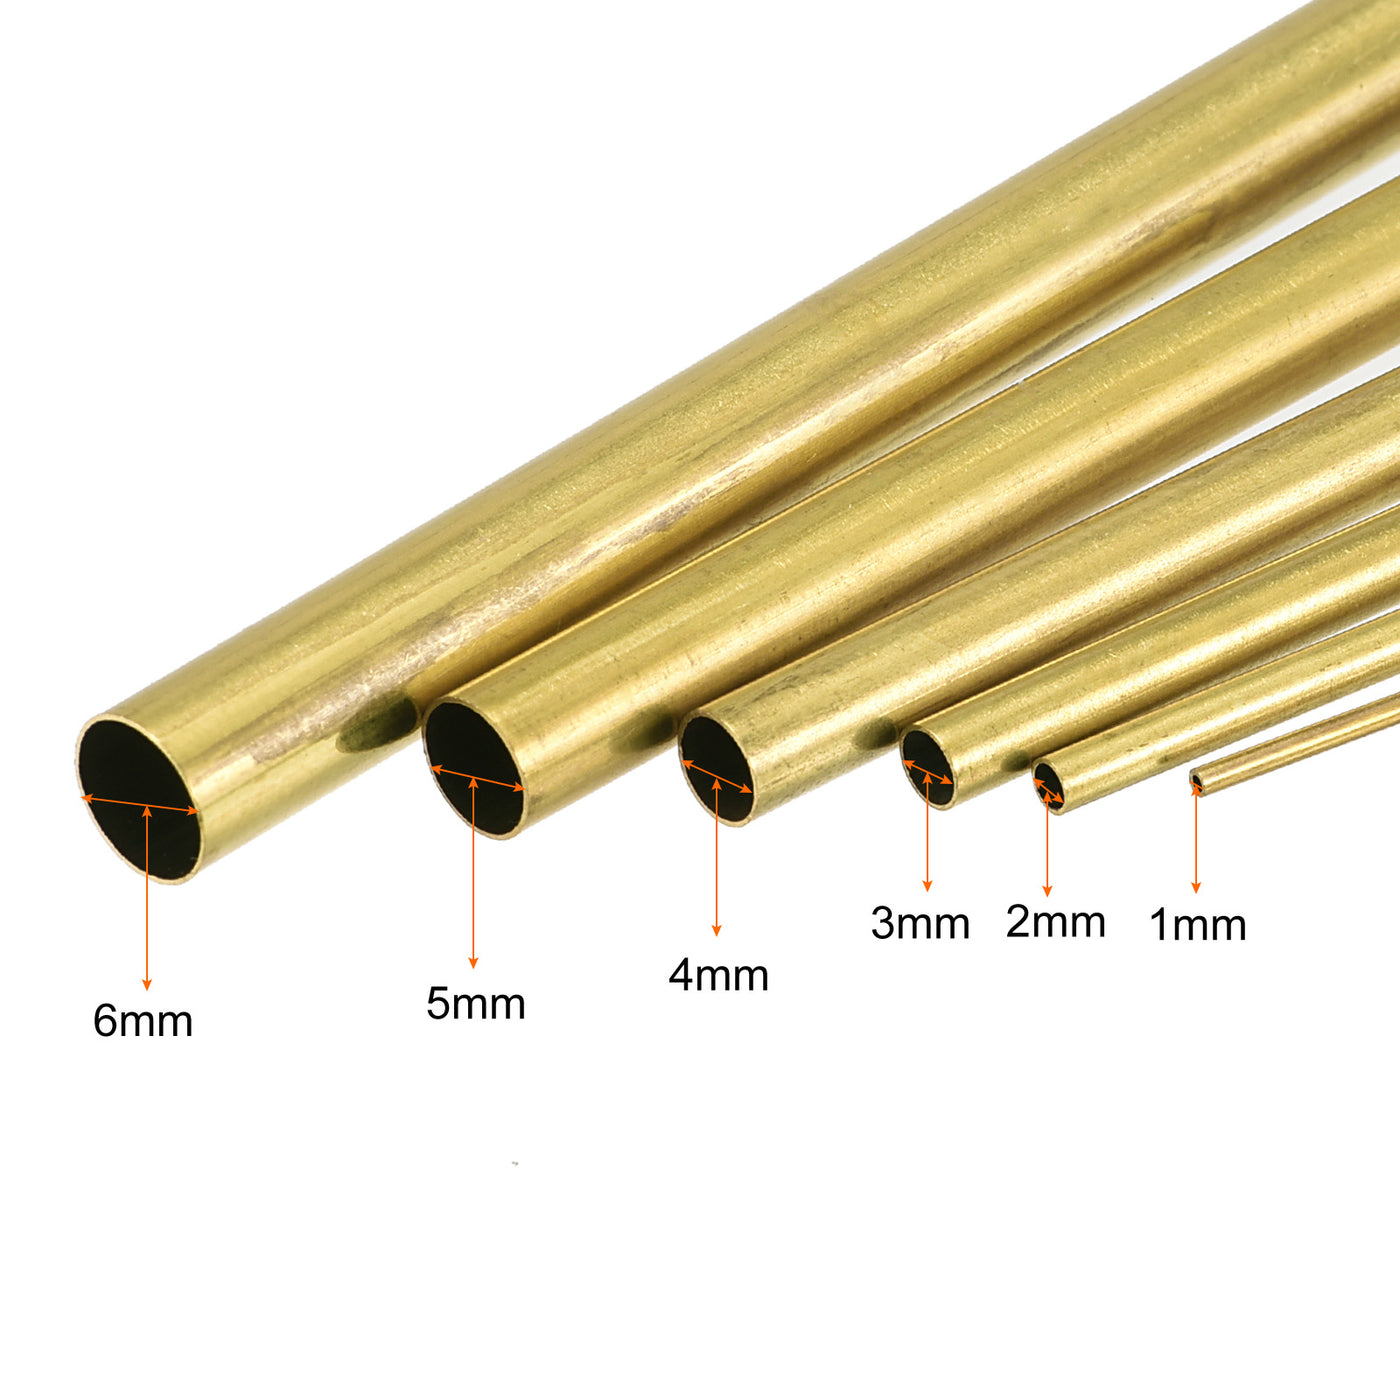 uxcell Uxcell Brass Tube, 1mm 2mm 3mm 4mm 5mm 6mm OD x 0.2mm Wall Thickness 300mm Length Metal Tubing, Pack of 6